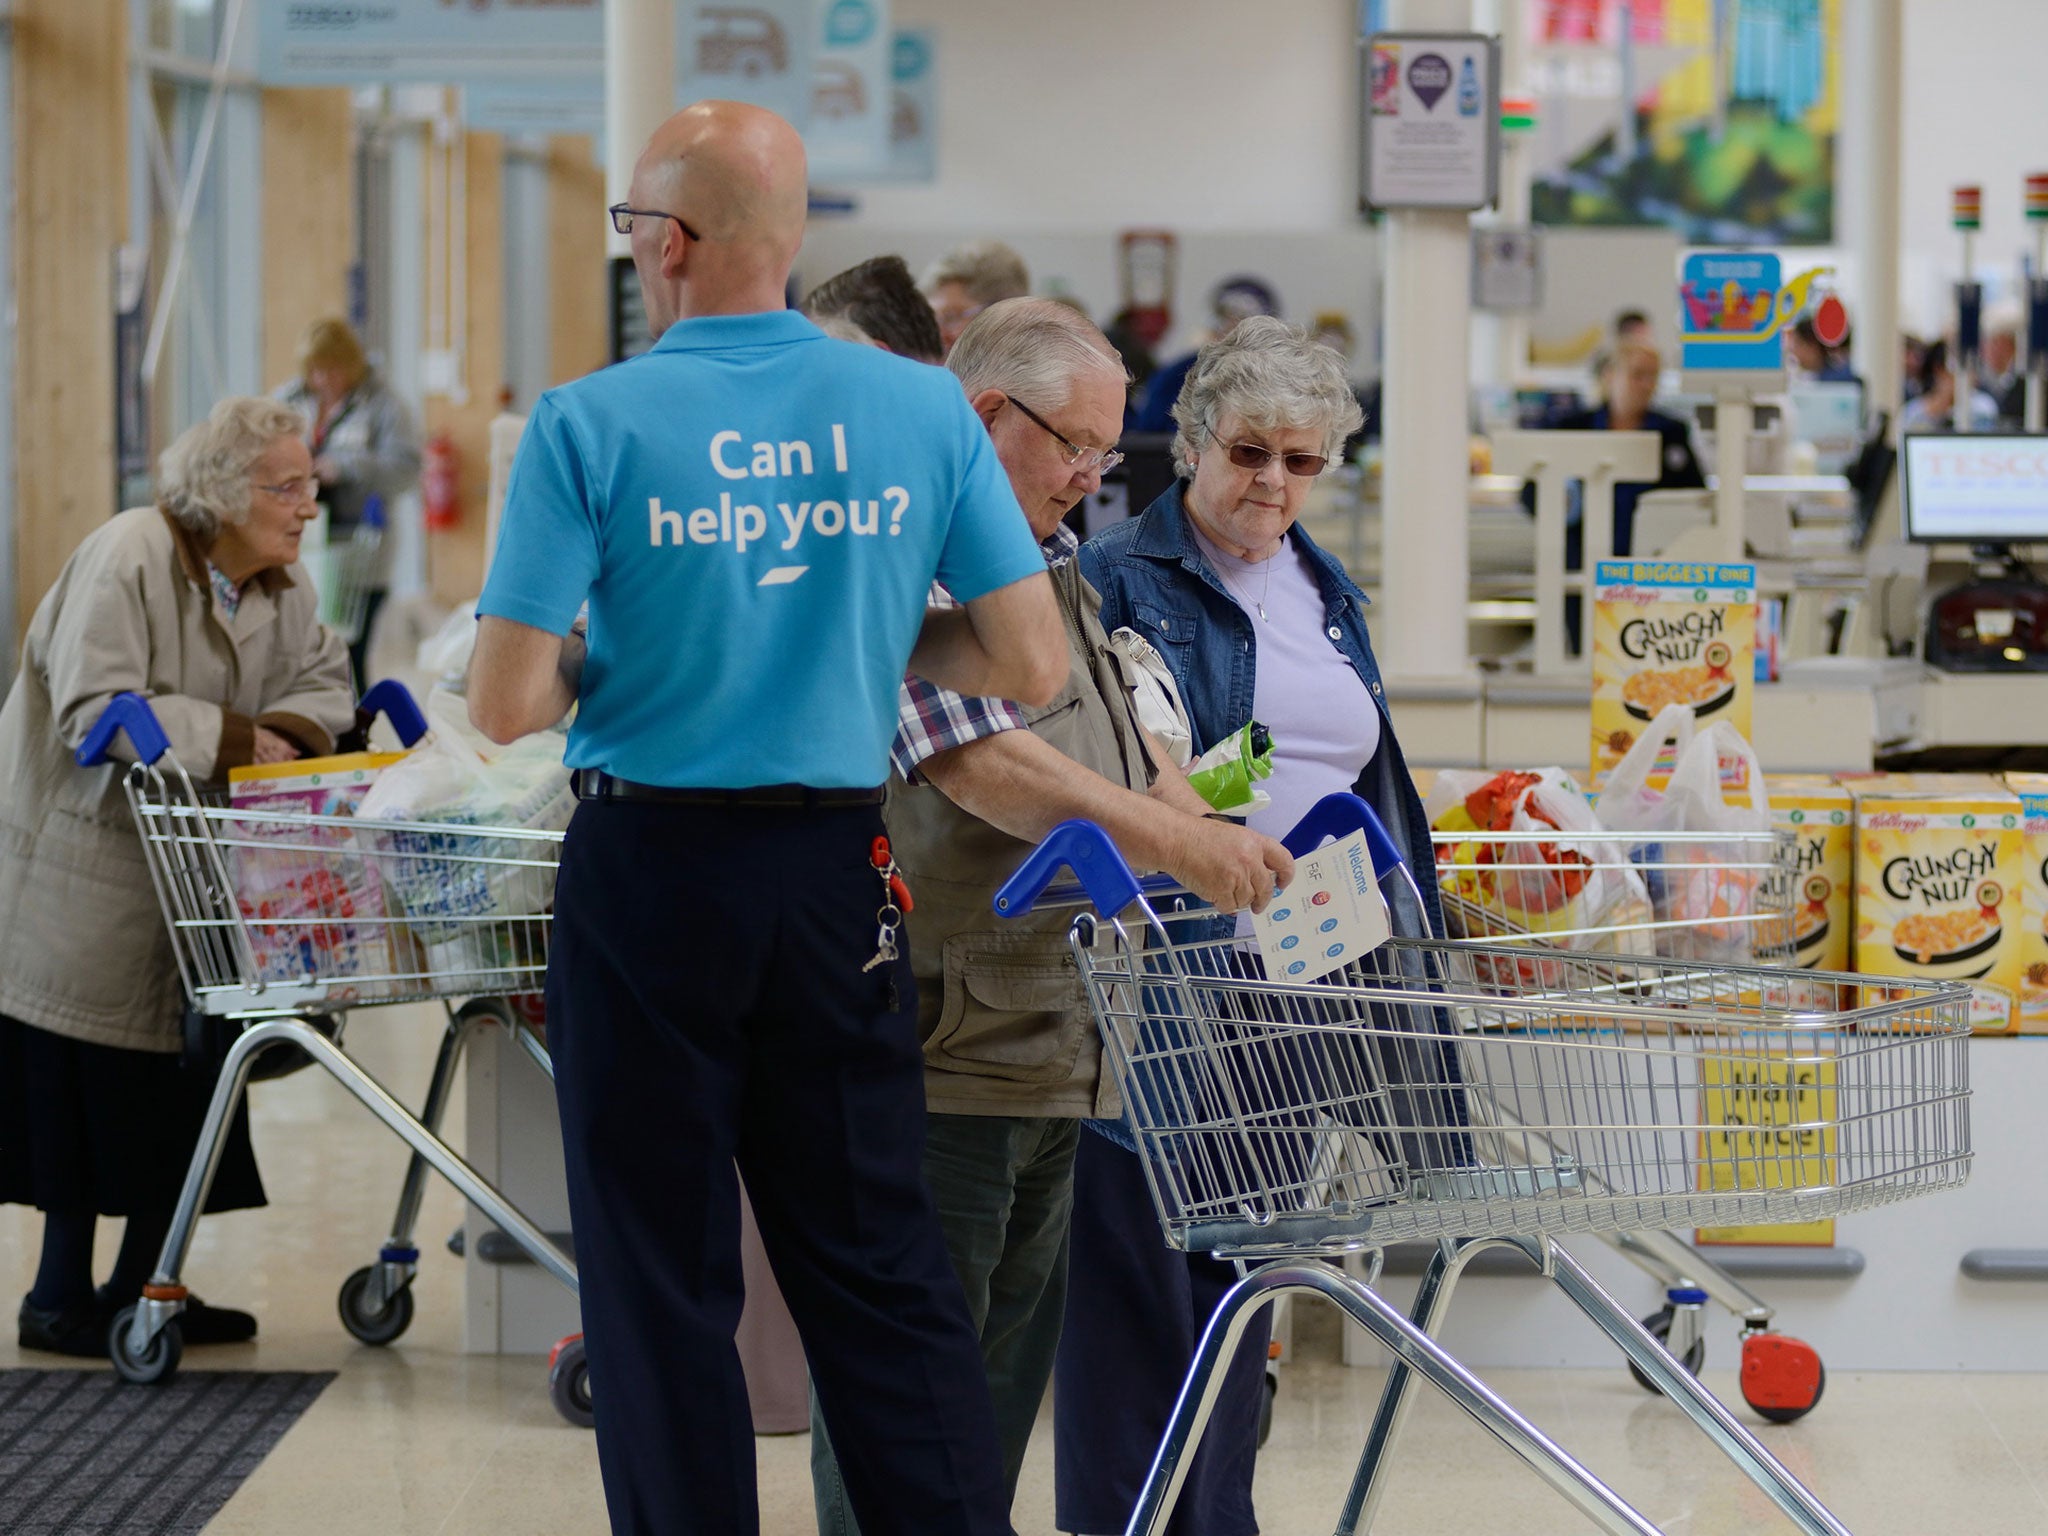 Tesco staff have faced a pay freeze and attempts to alter the pension scheme, but the company has made concessions